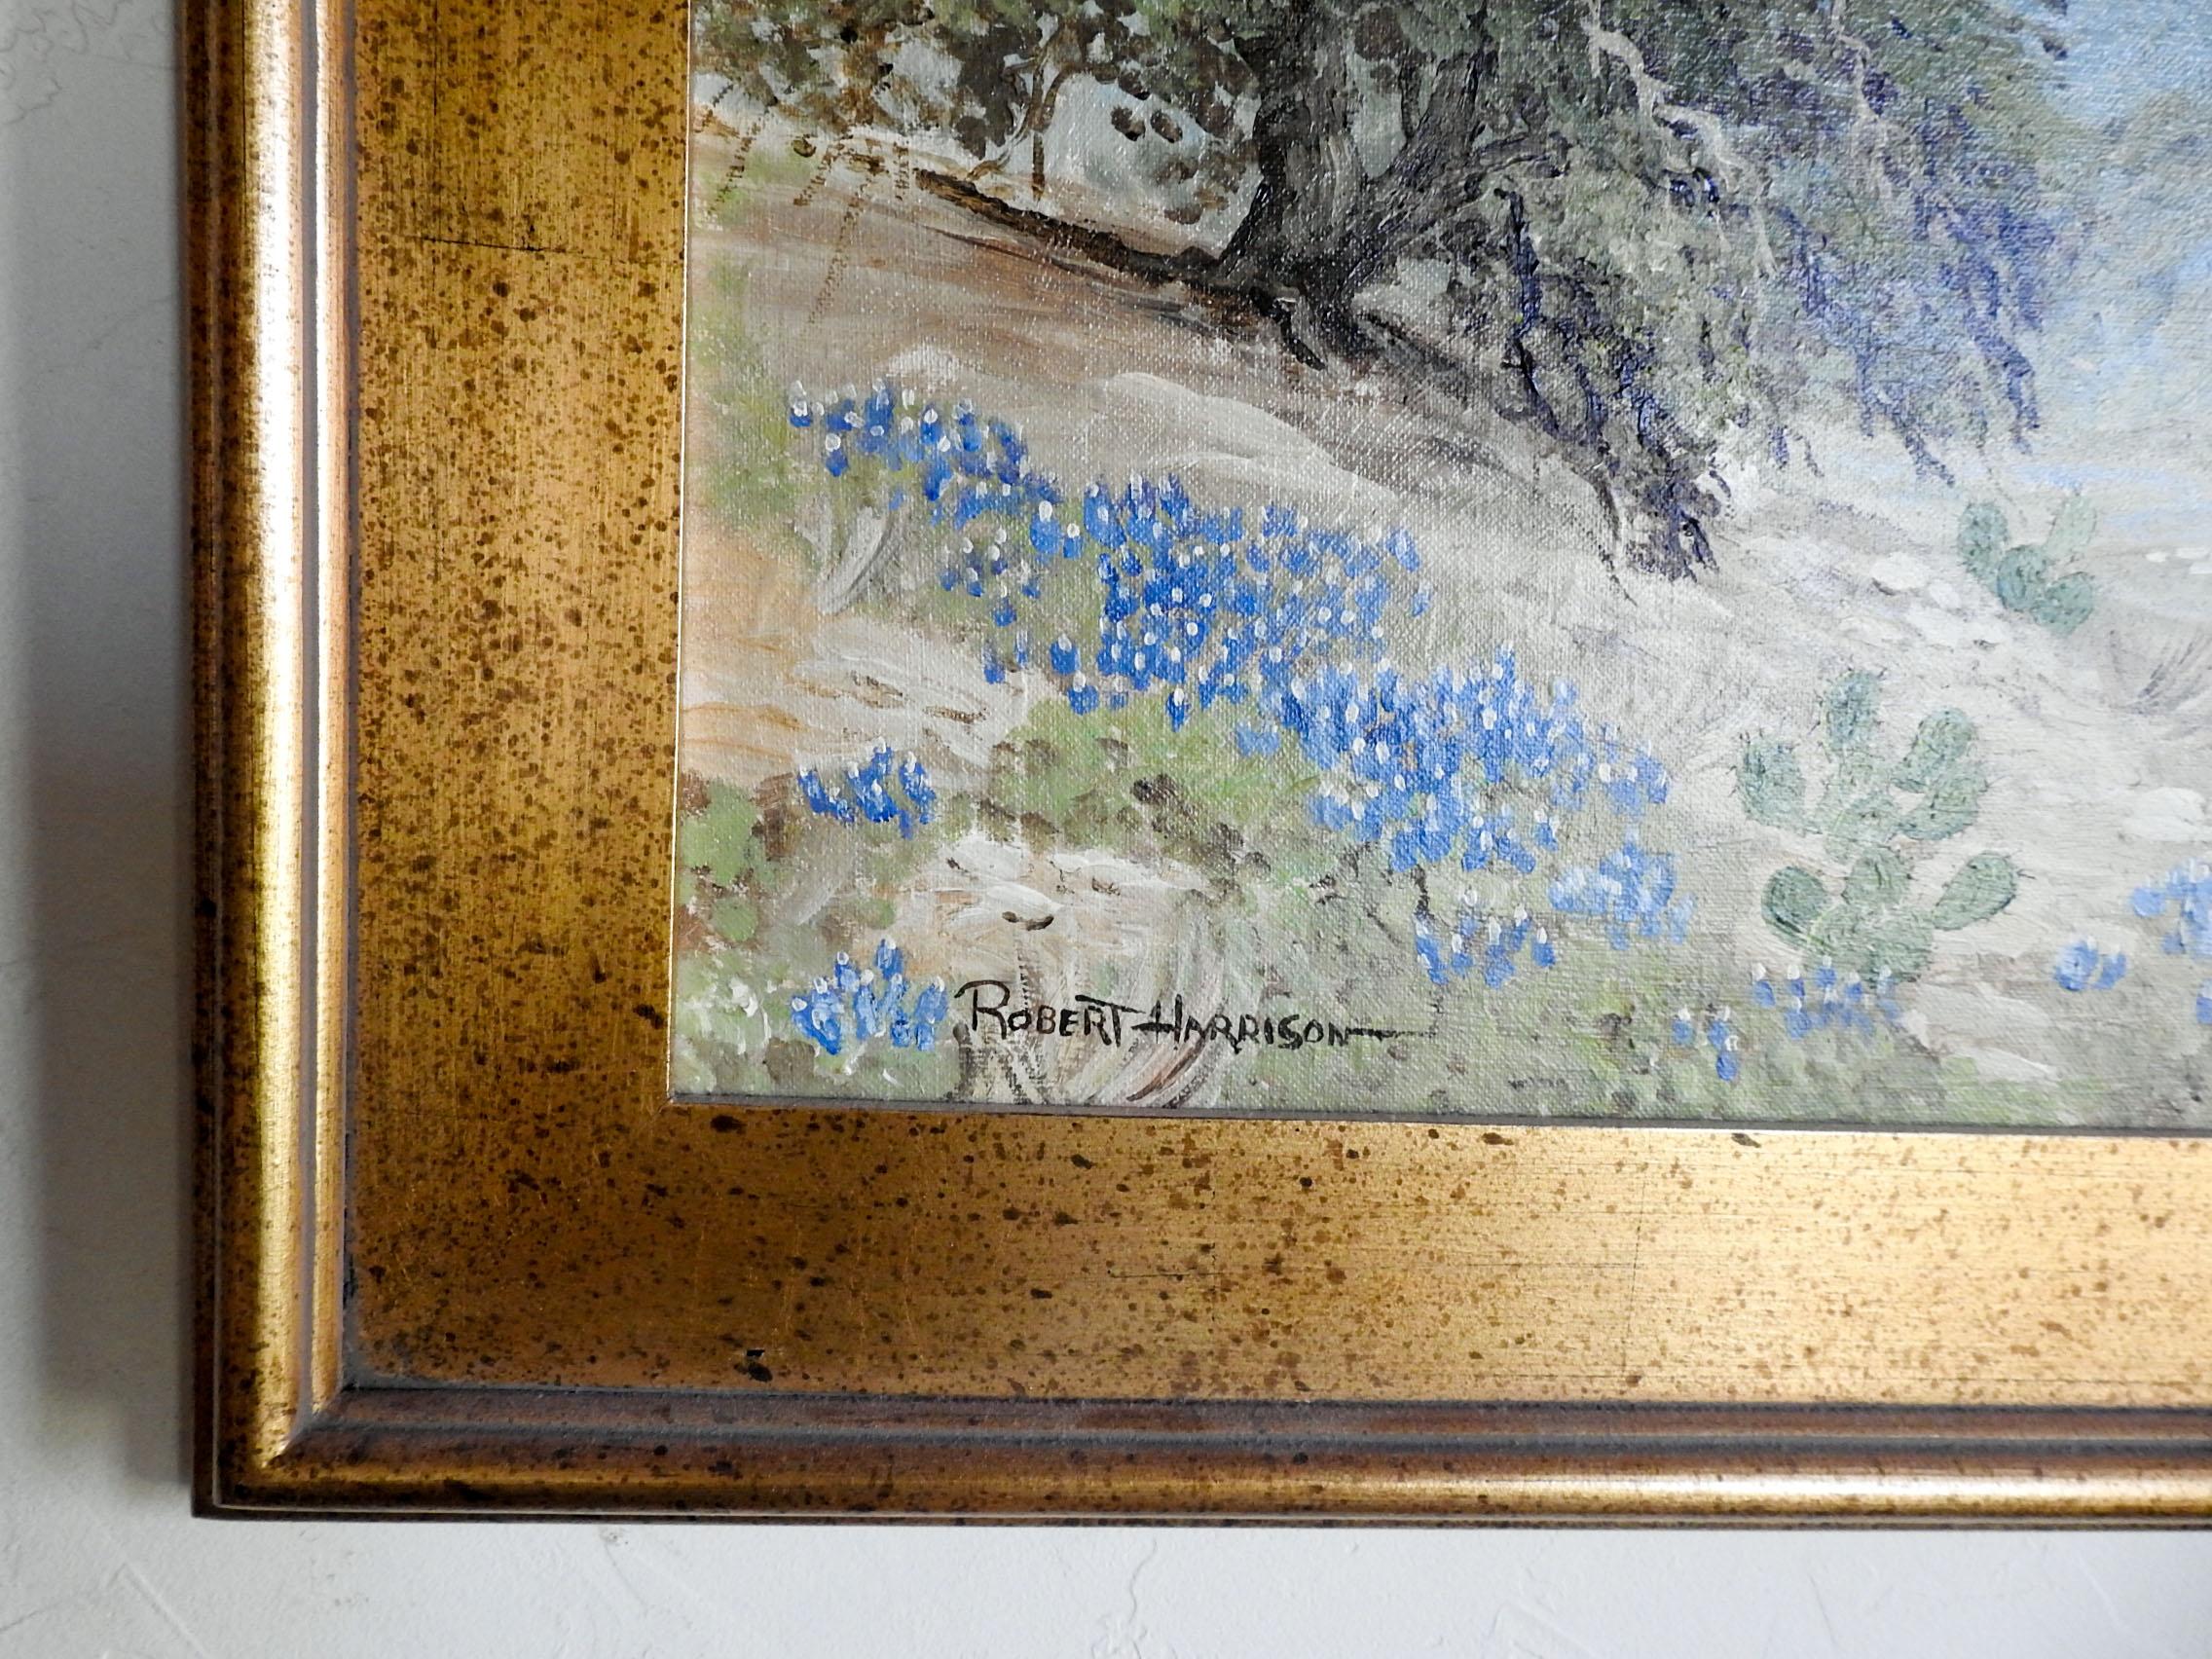 Oil on canvas board by Robert Harrison of Texas hill country bluebonnet landscape. Signed lower left corner. Displayed in giltwood frame, opening size 24